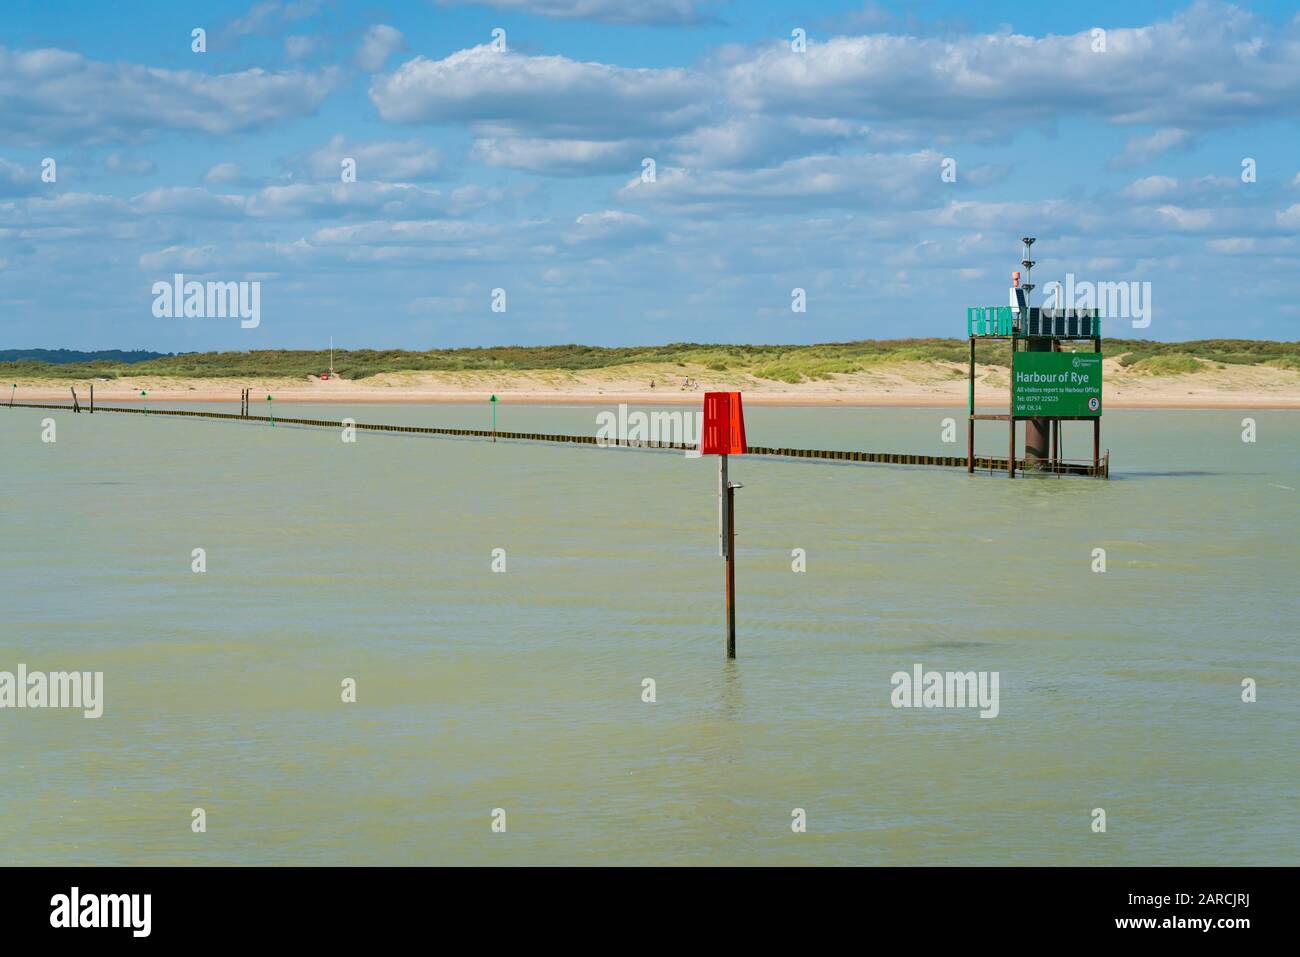 Rye Harbour - August 20 2019; Navigation marker and sign at entrance to Rye Harbour on Rother River. Stock Photo